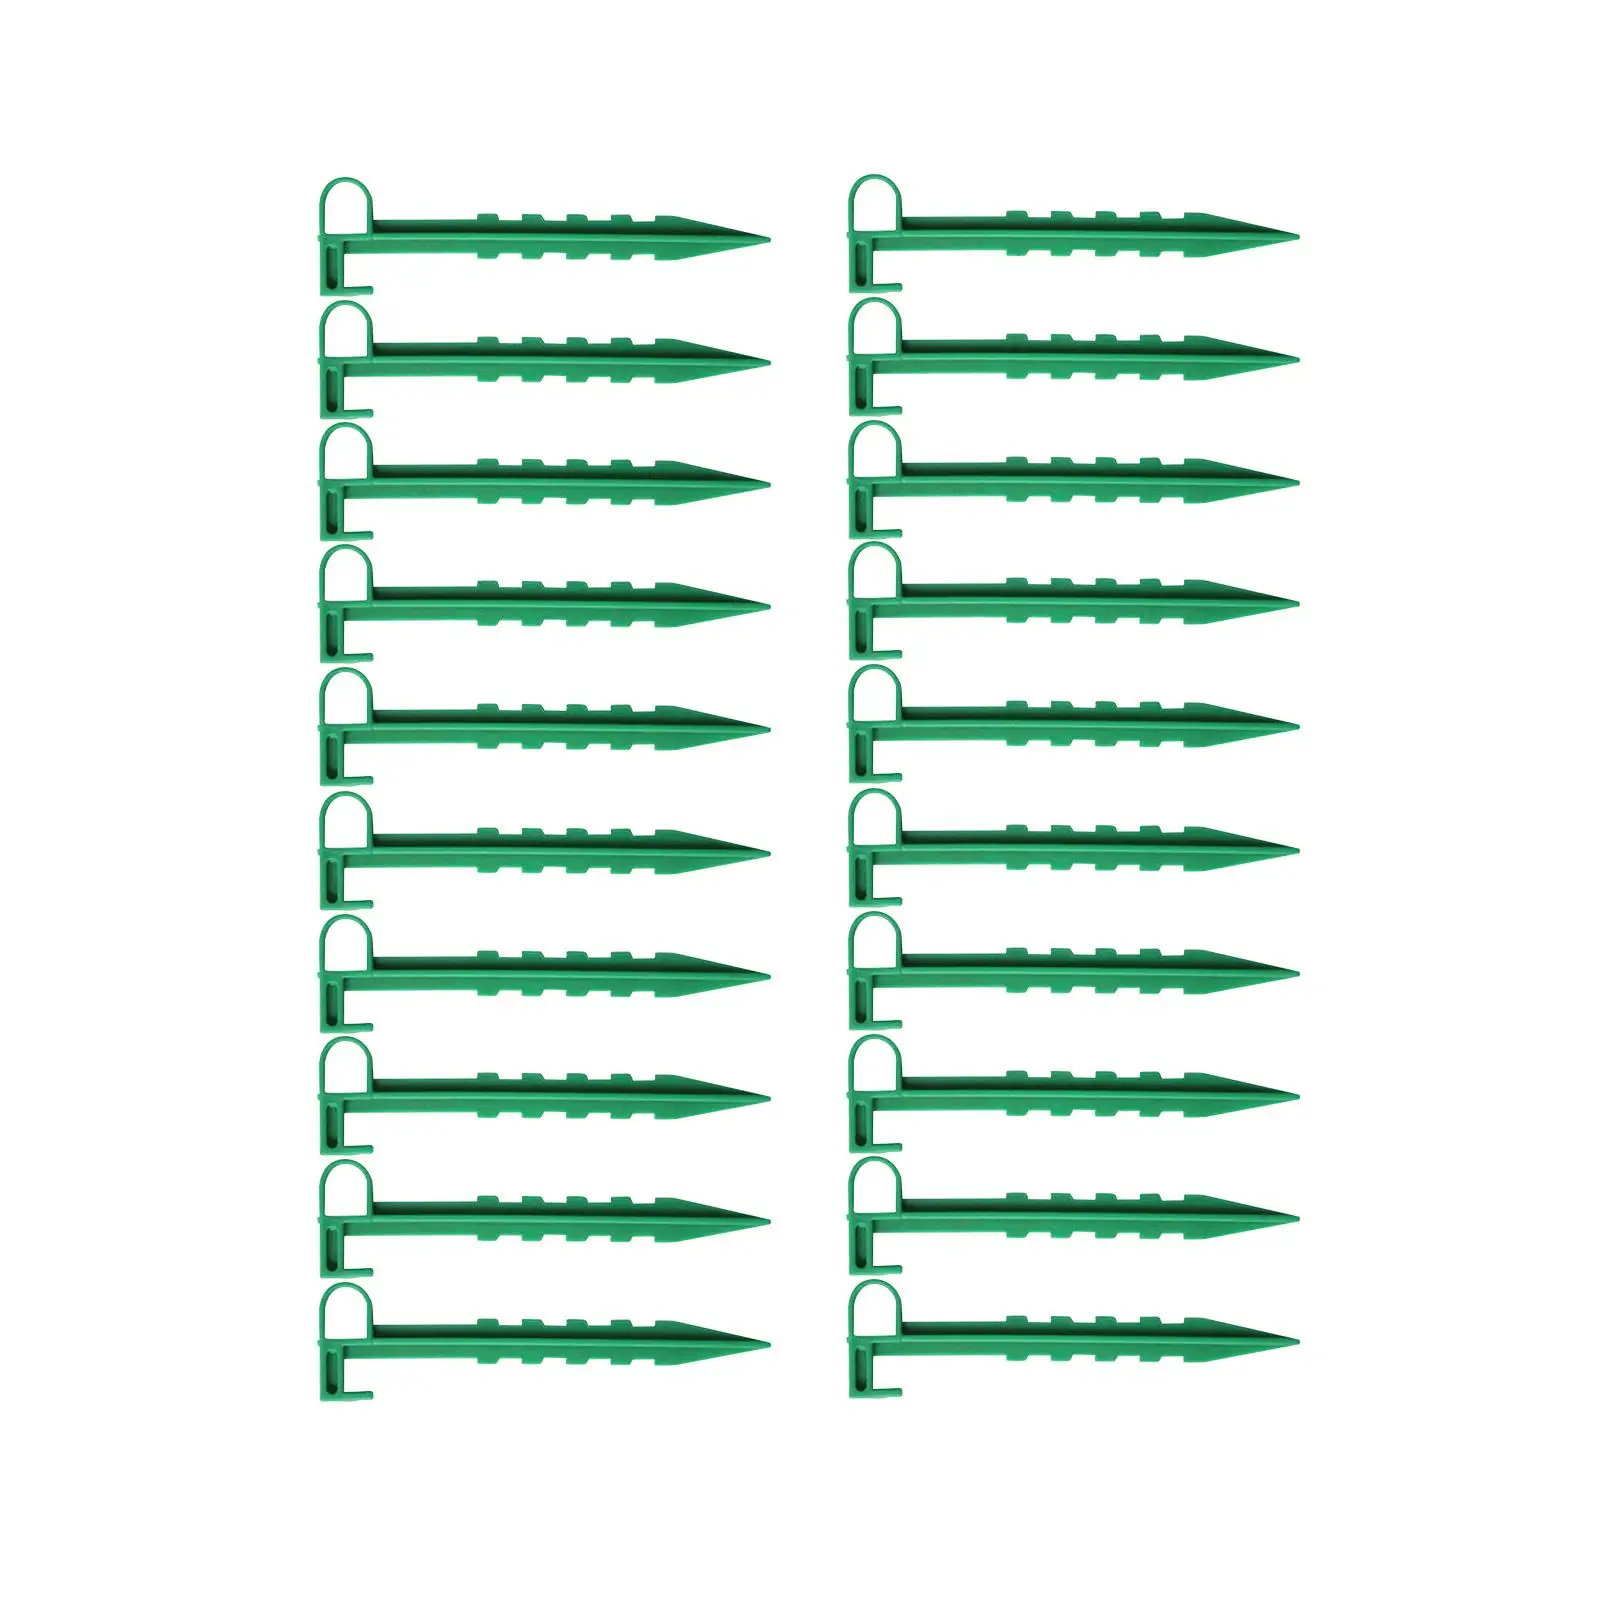 20Pcs Garden Stakes Ground Stakes Yard Fixing Anchor Pegs Garden Anchor Pegs for Keeping Garden Netting Down Tents Securing